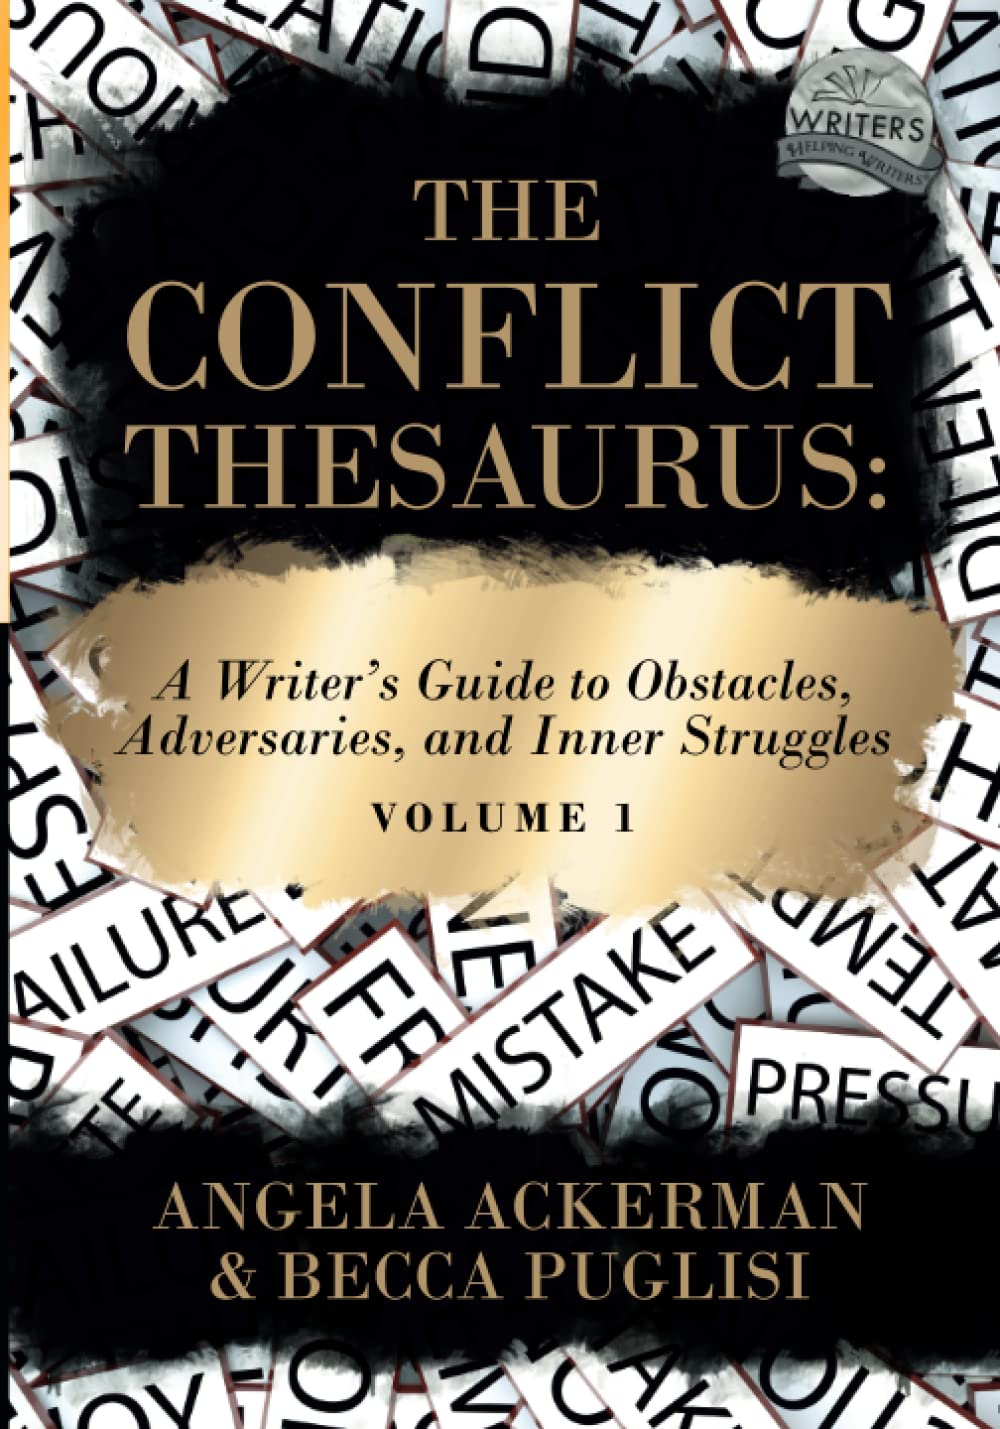 The Conflict Thesaurus: A Writer’s Guide to Obstacles, Adversaries, and Inner Struggles